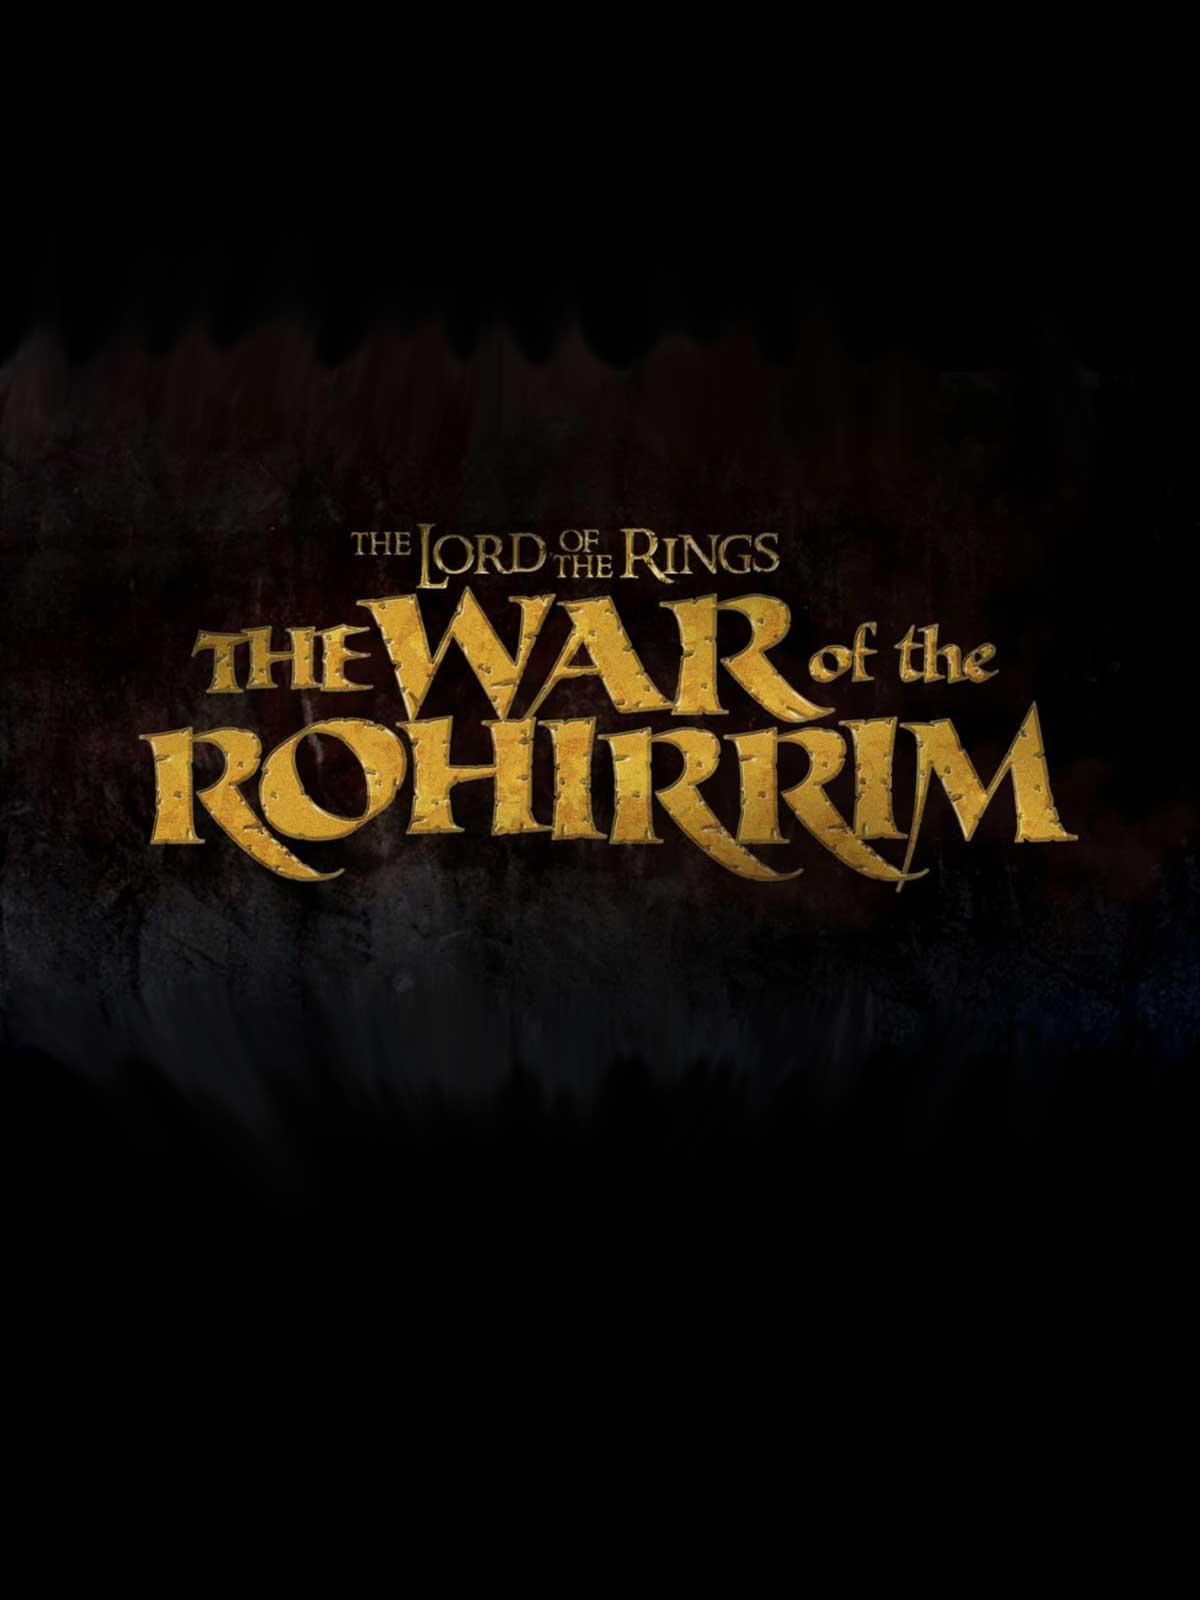 The Lord of the Rings The War of the Rohirrim Film Poster